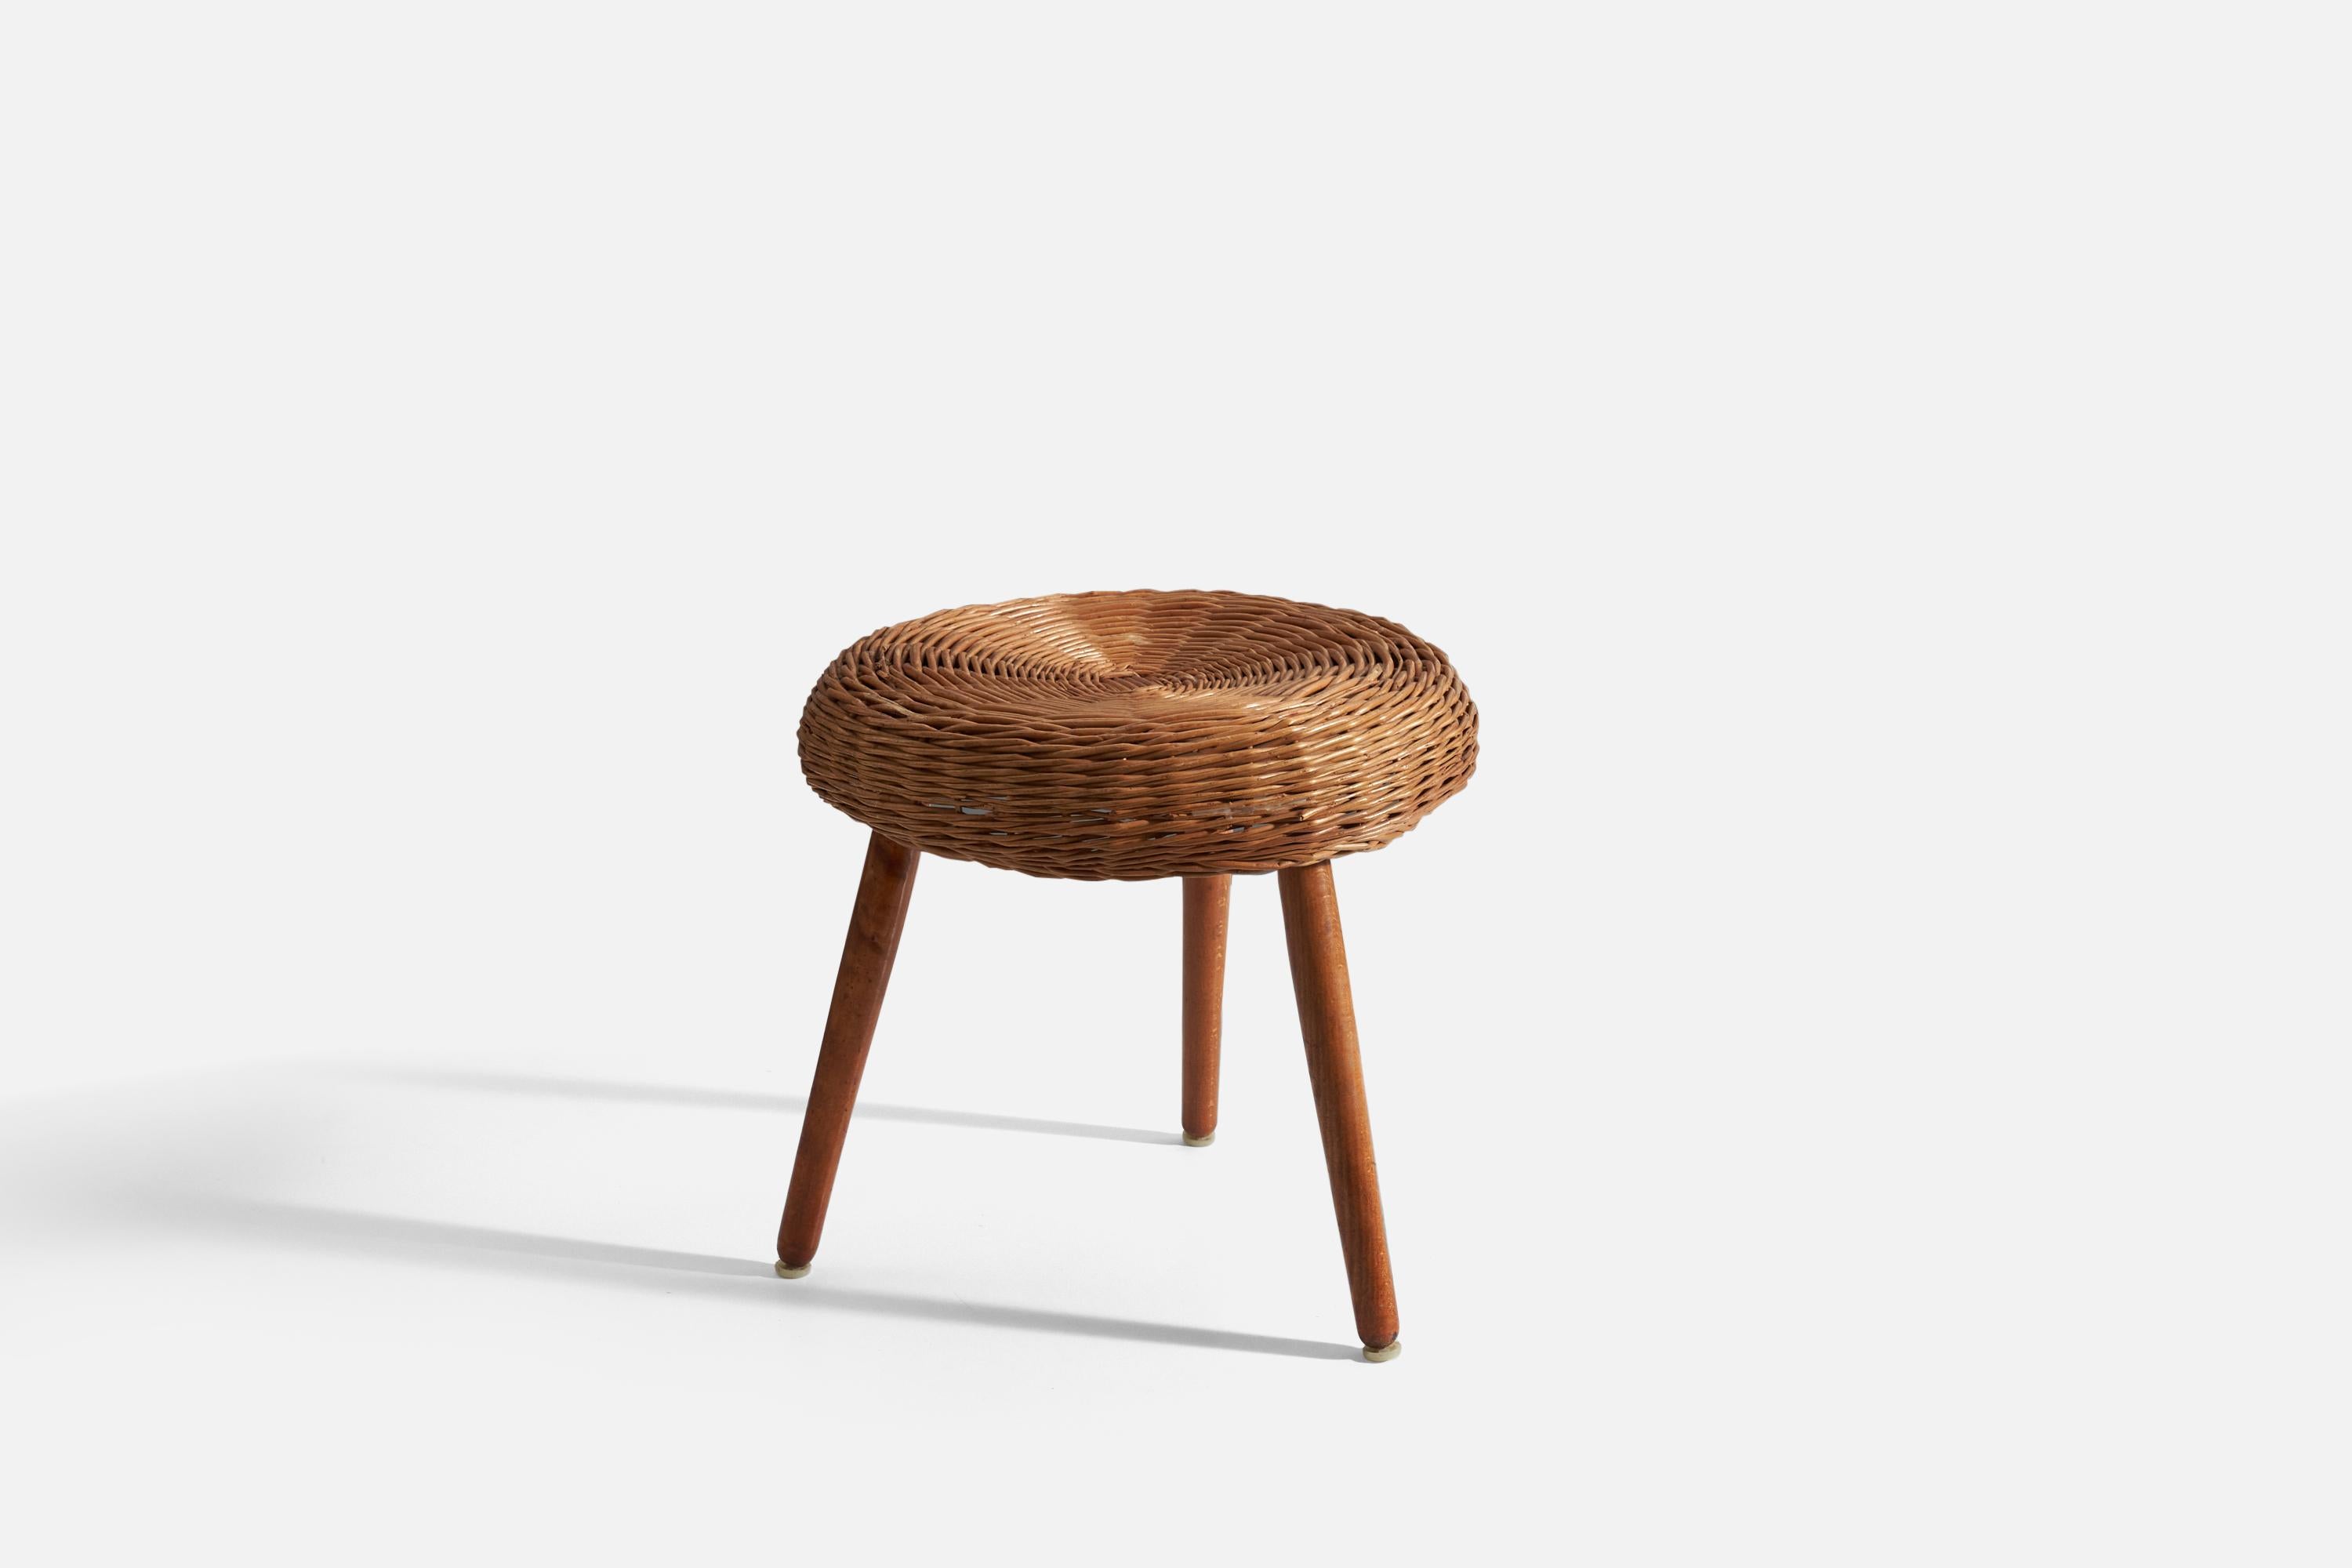 Tony Paul 'Attributed' Stool, Wicker, United States, 1950s In Good Condition For Sale In High Point, NC